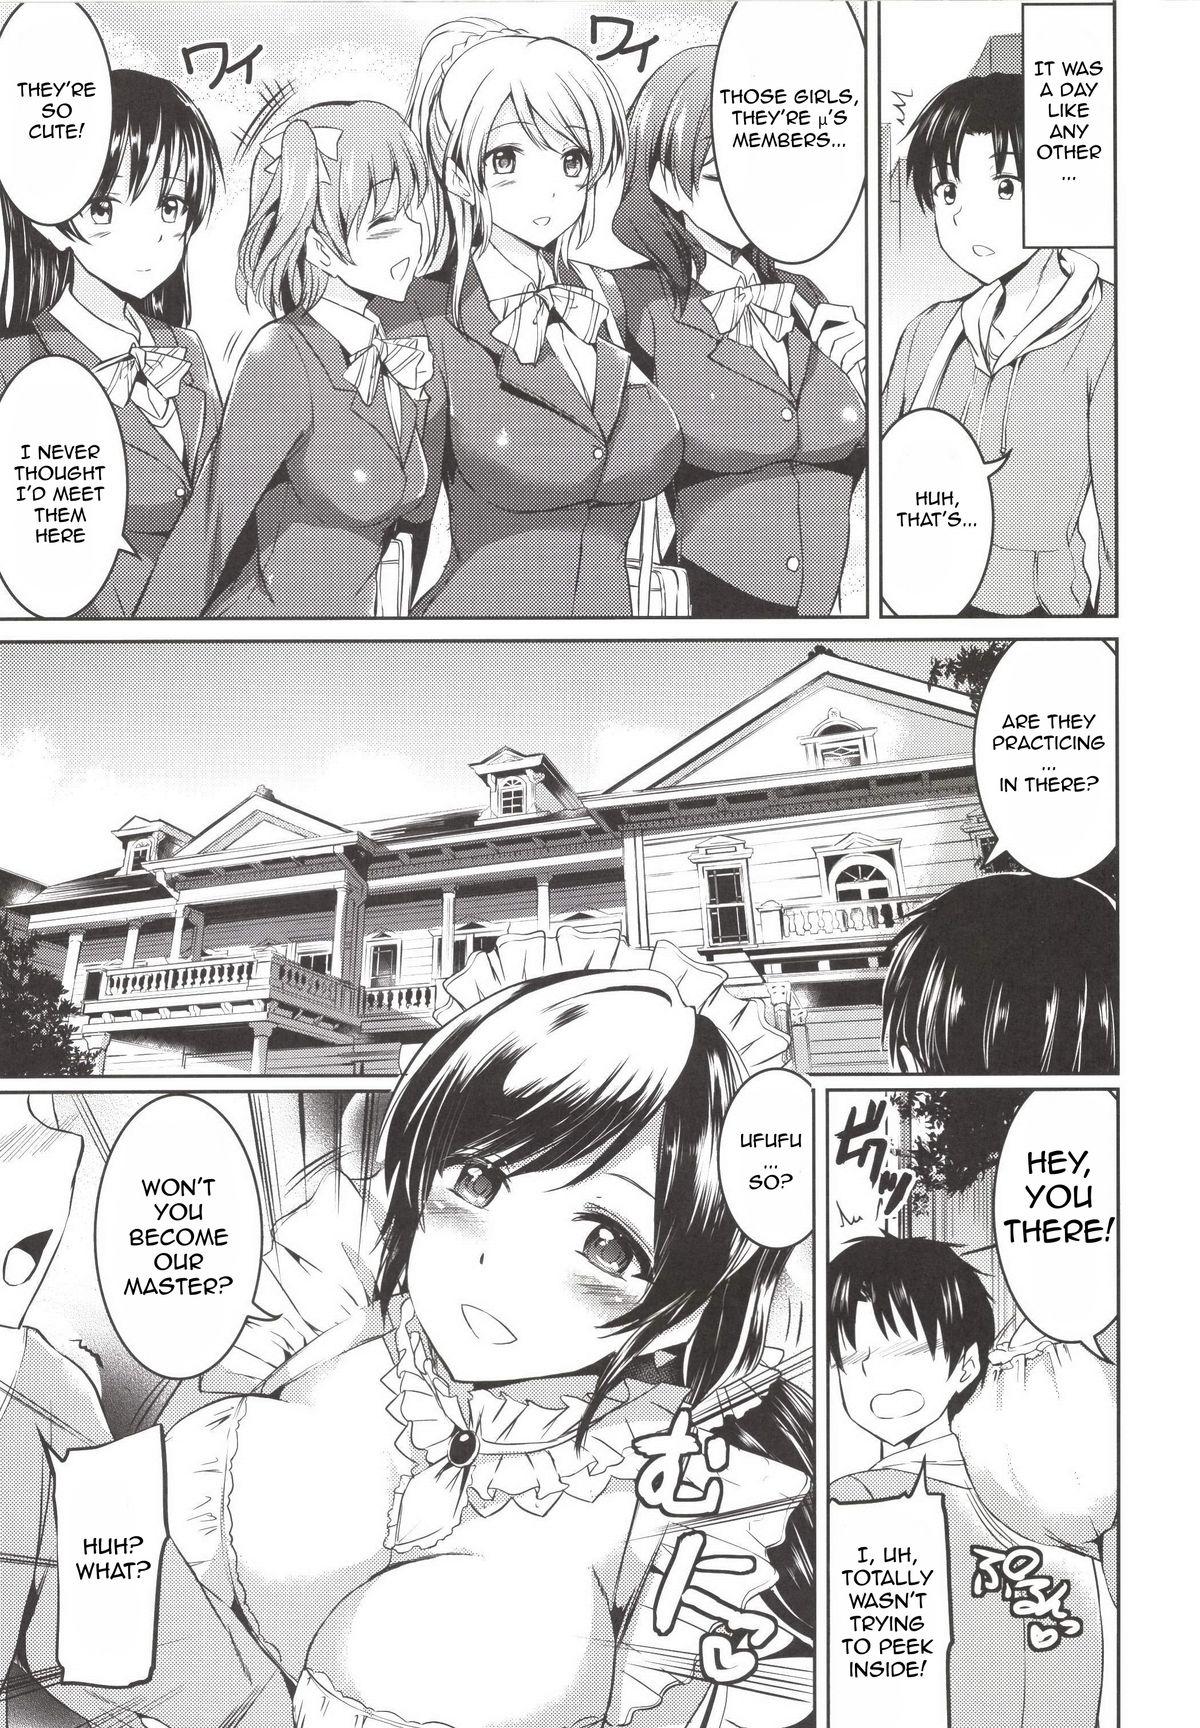 Nerd Maid Live! - Love live Perra - Page 2